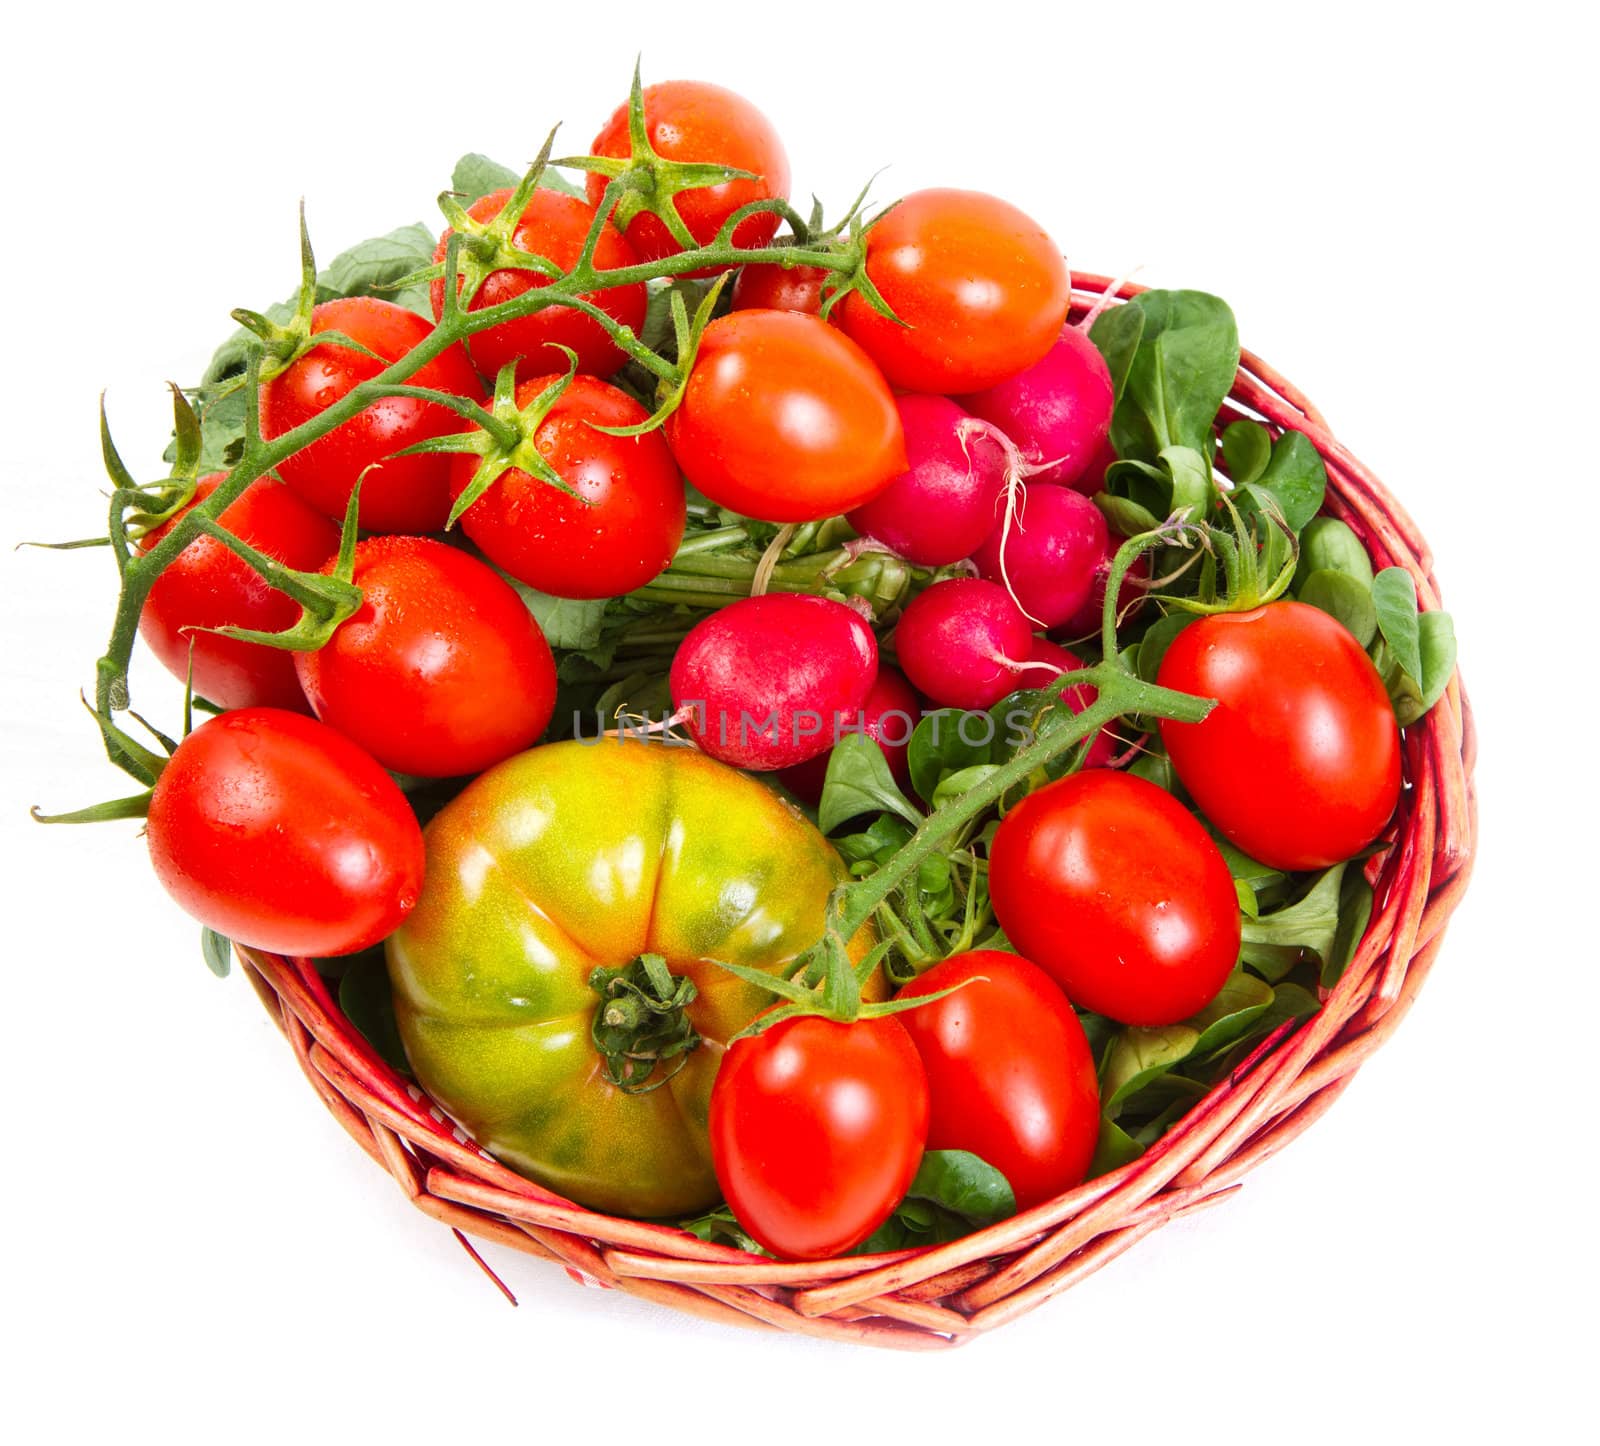 tomatoes in a basket, isolated on white 